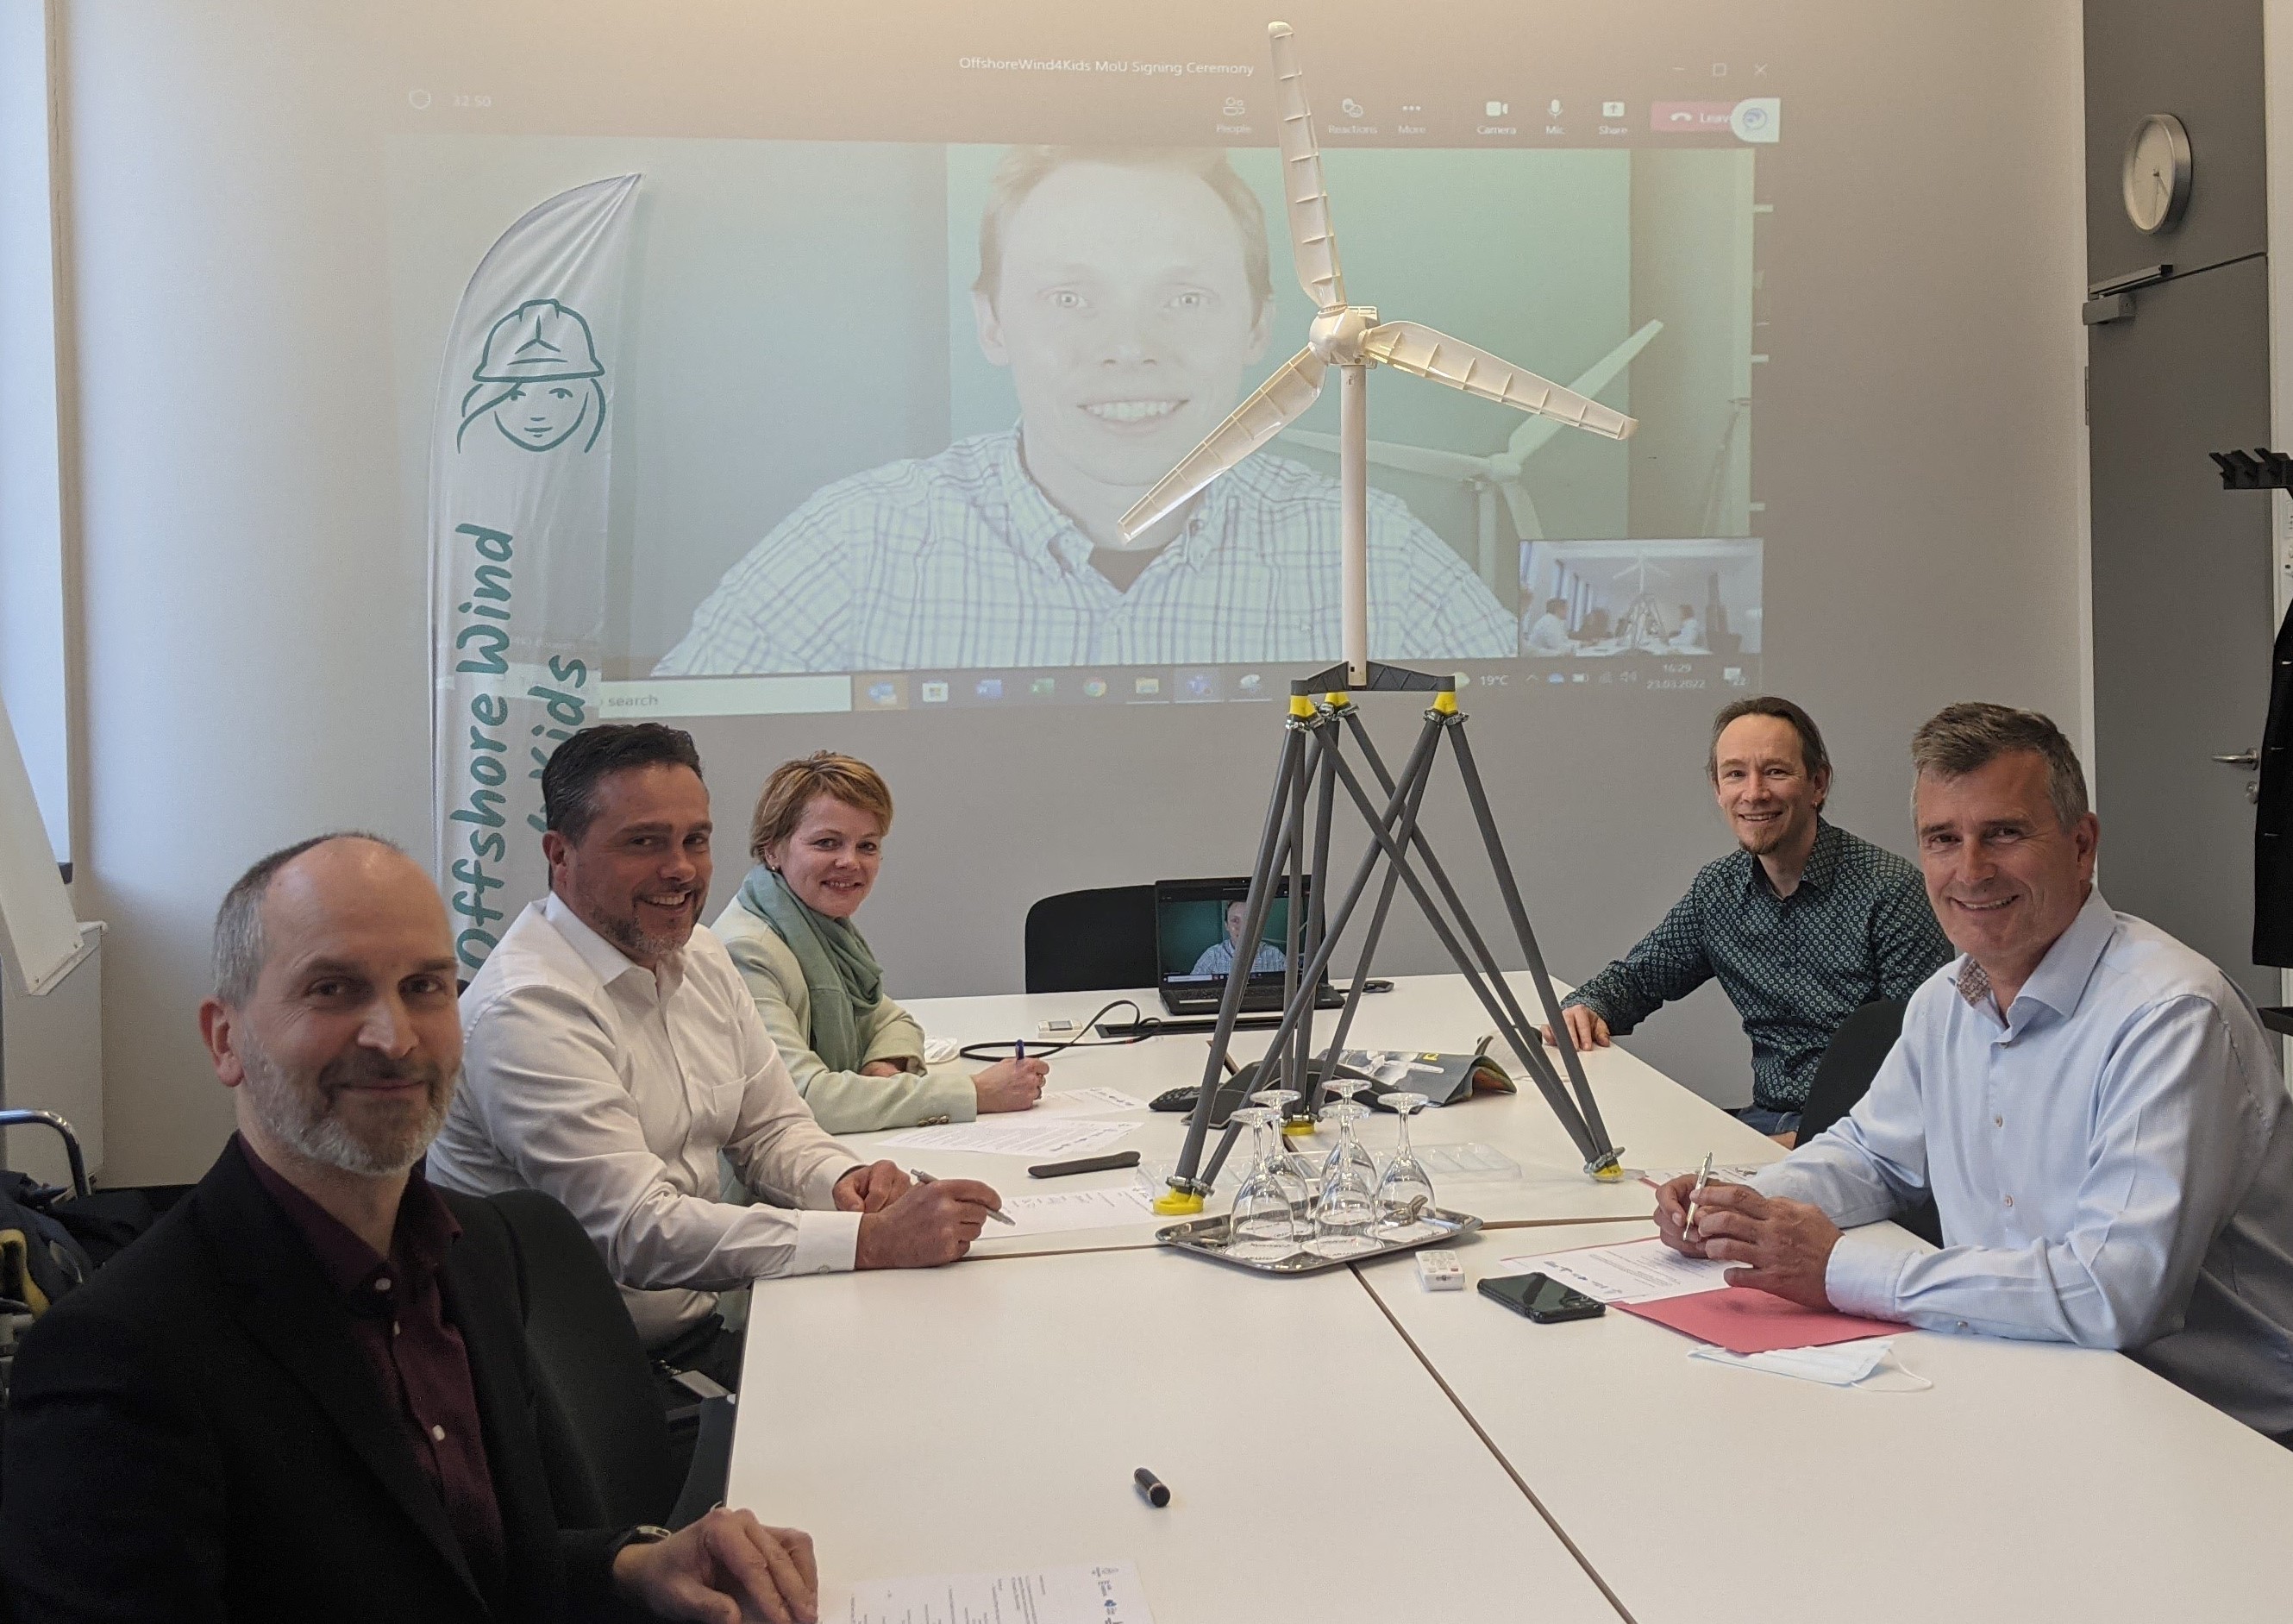 German Offshore Wind Energy Foundation, Competence Center for Renewable Energy and Energy Efficiency, DNV and Northland Power Europe agree on cooperation with OffshoreWind4Kids